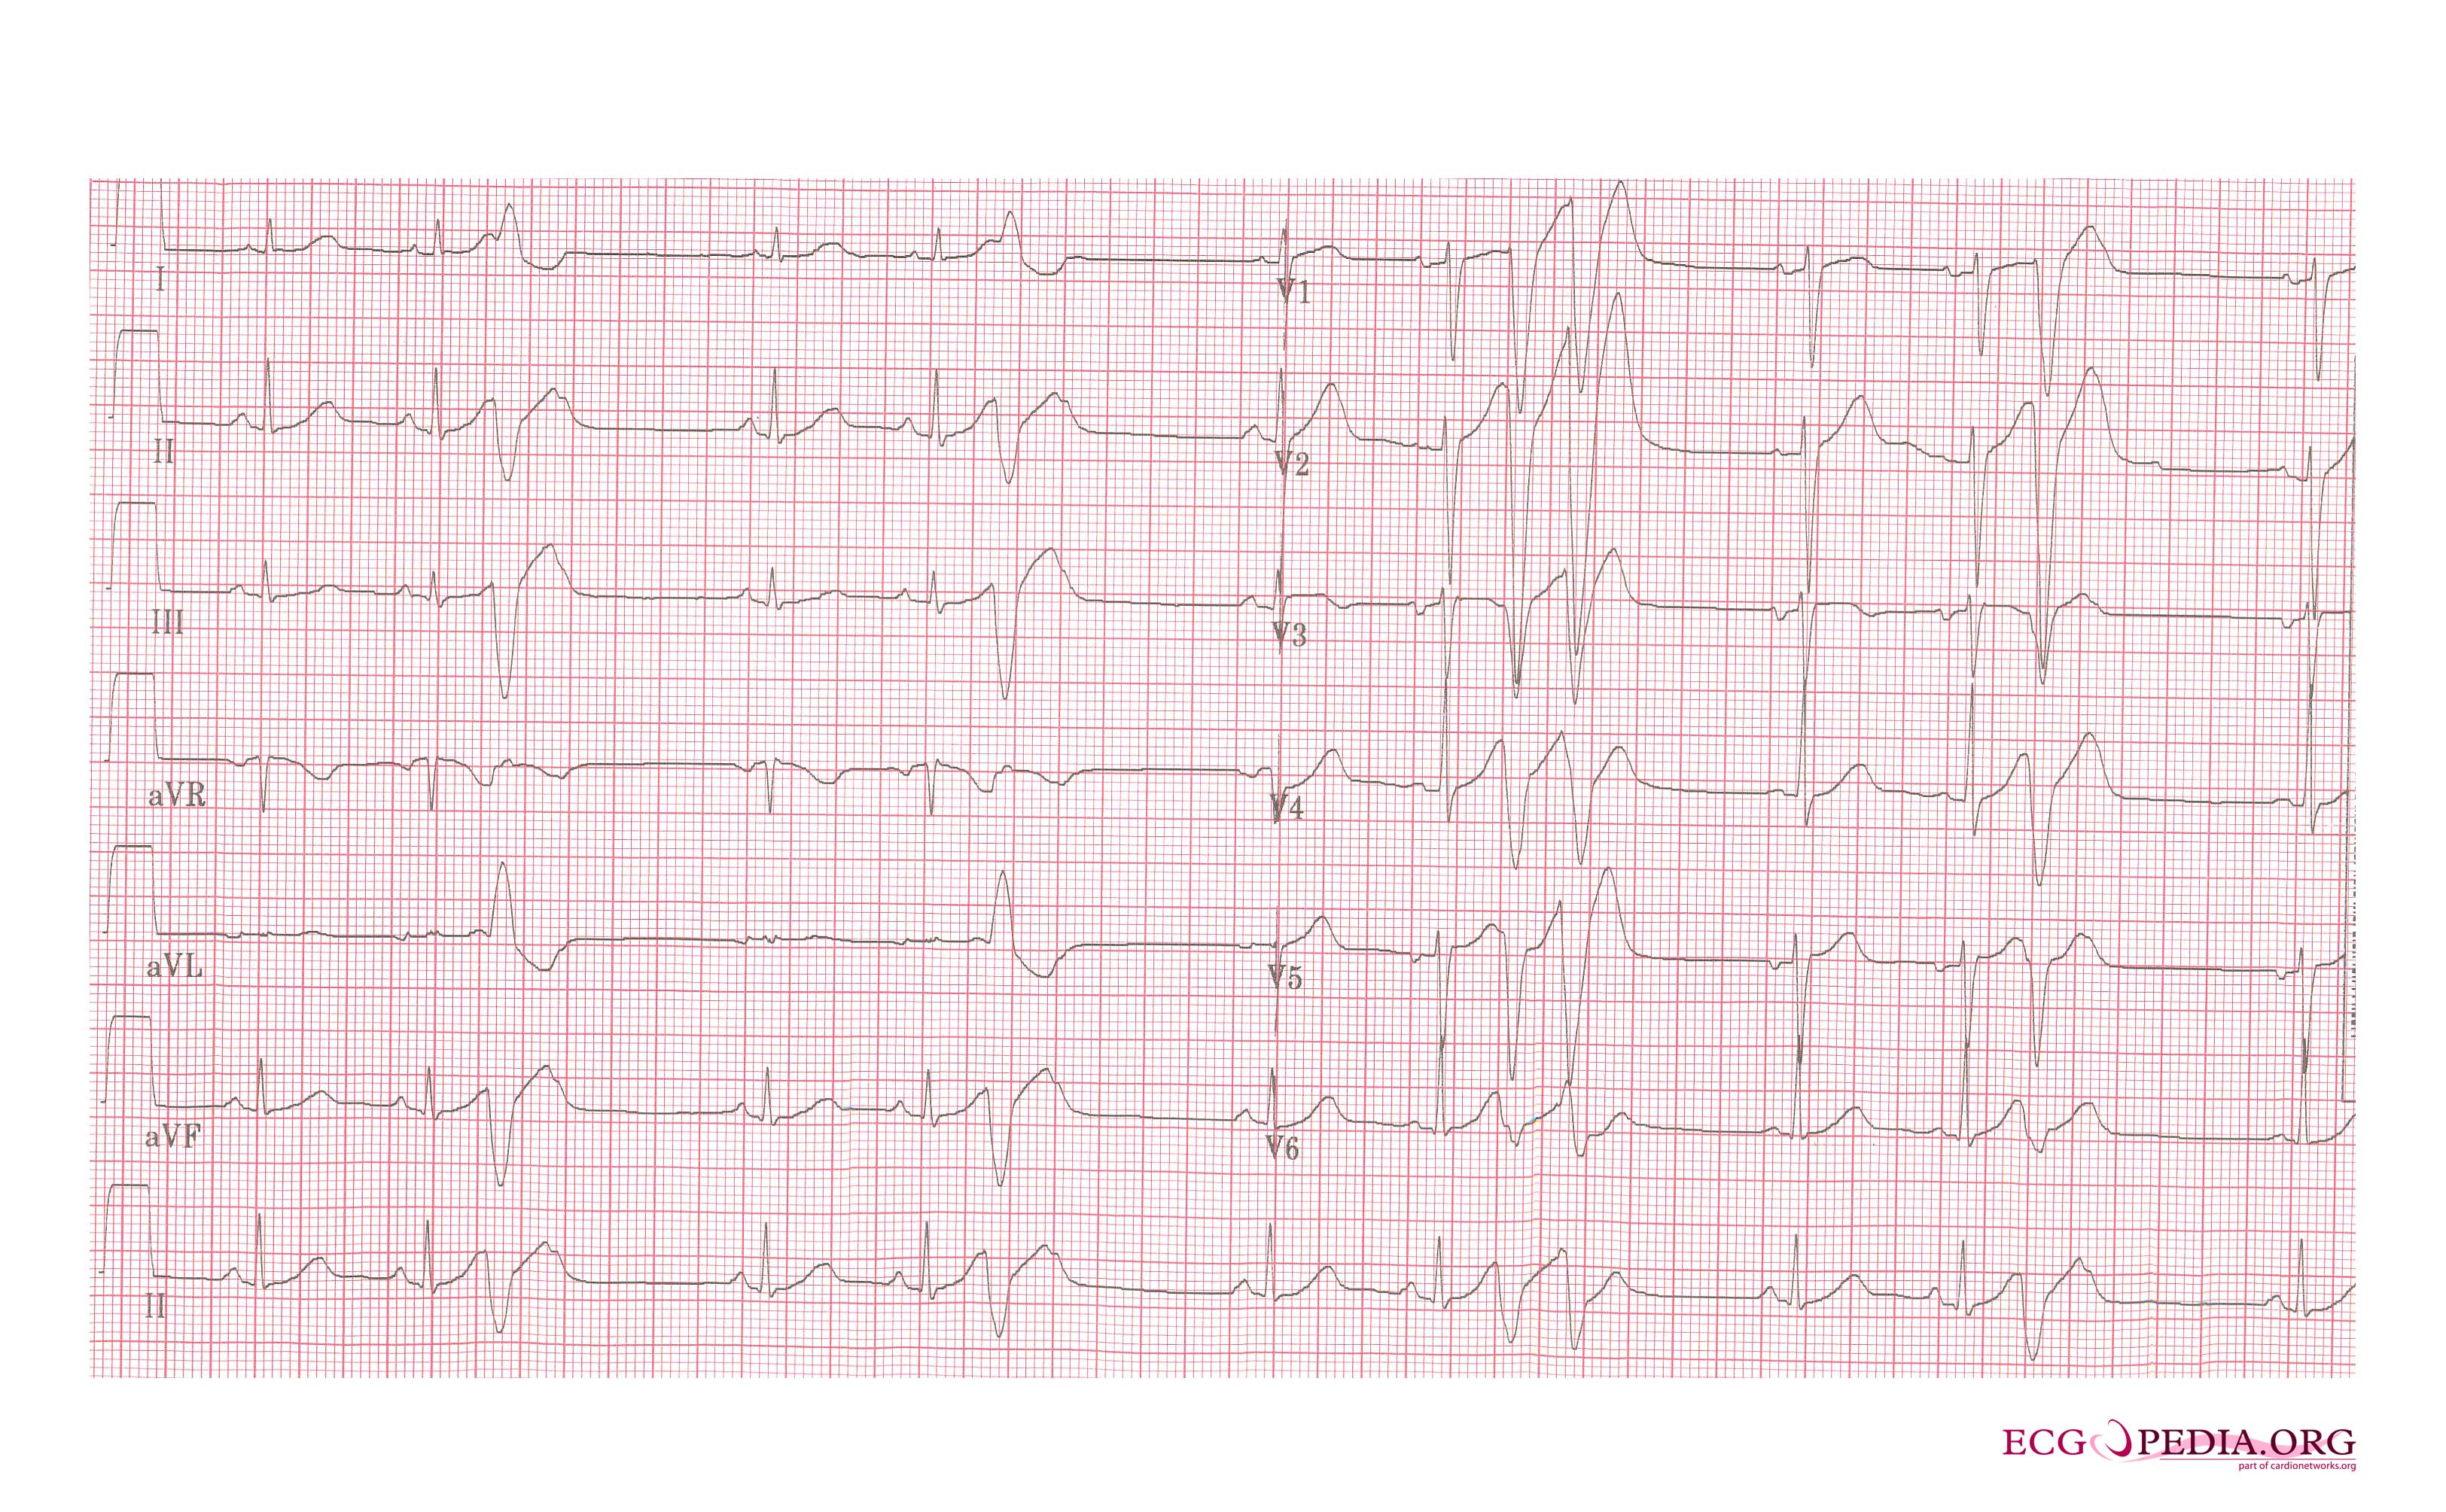 Arrhythmias in a patient with short coupled torsade de pointes: frequent short coupled extrasystoles[5]